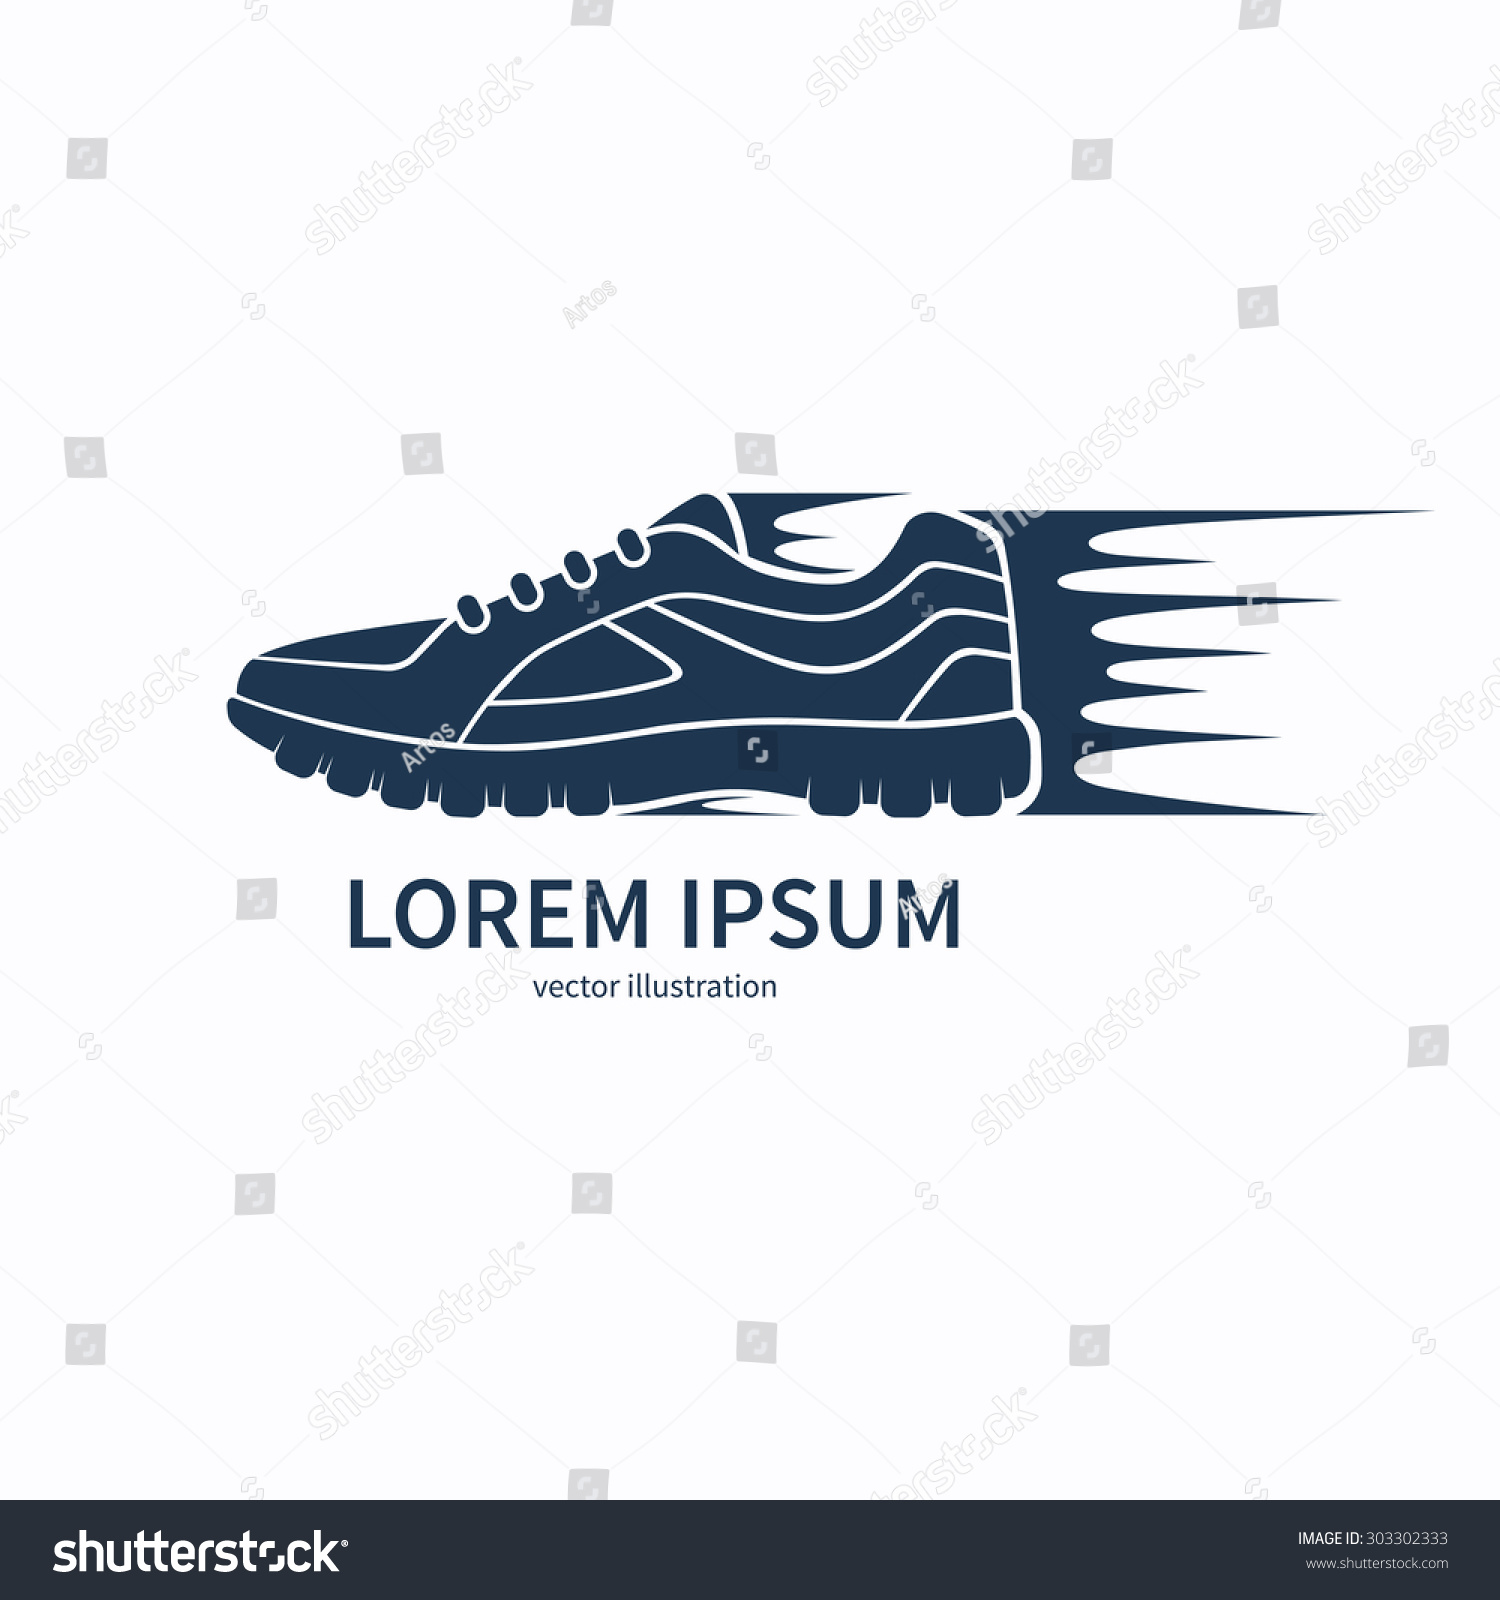 Speeding Running Shoe Icon, Symbol Or Logo. Sneaker Silhouette With ...